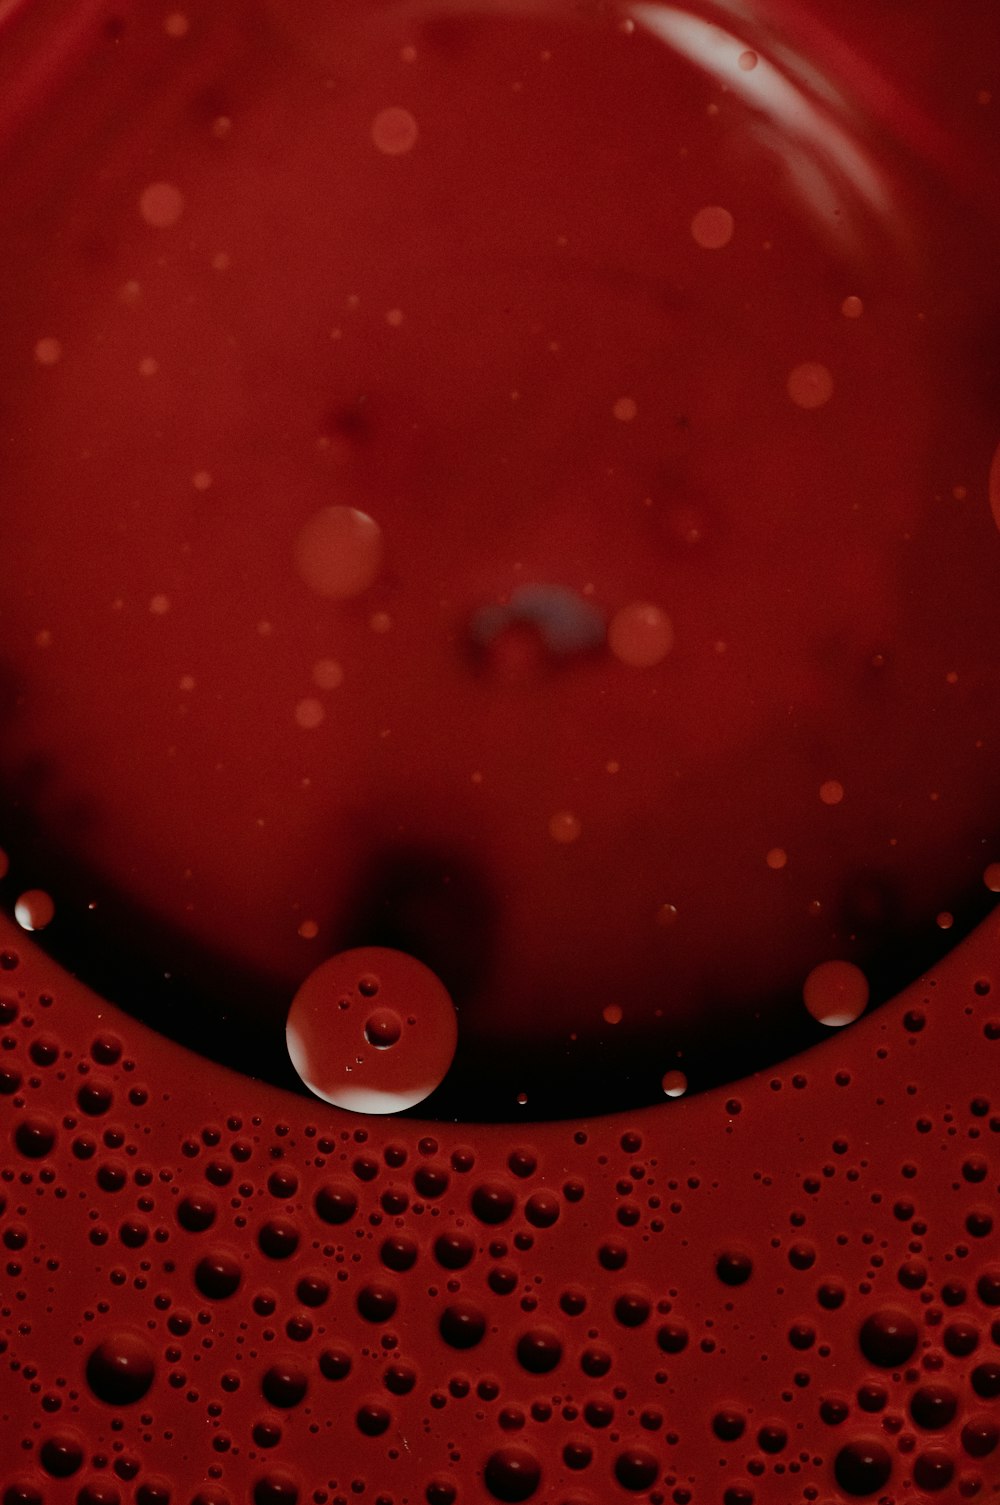 a close up of a red liquid in a bowl